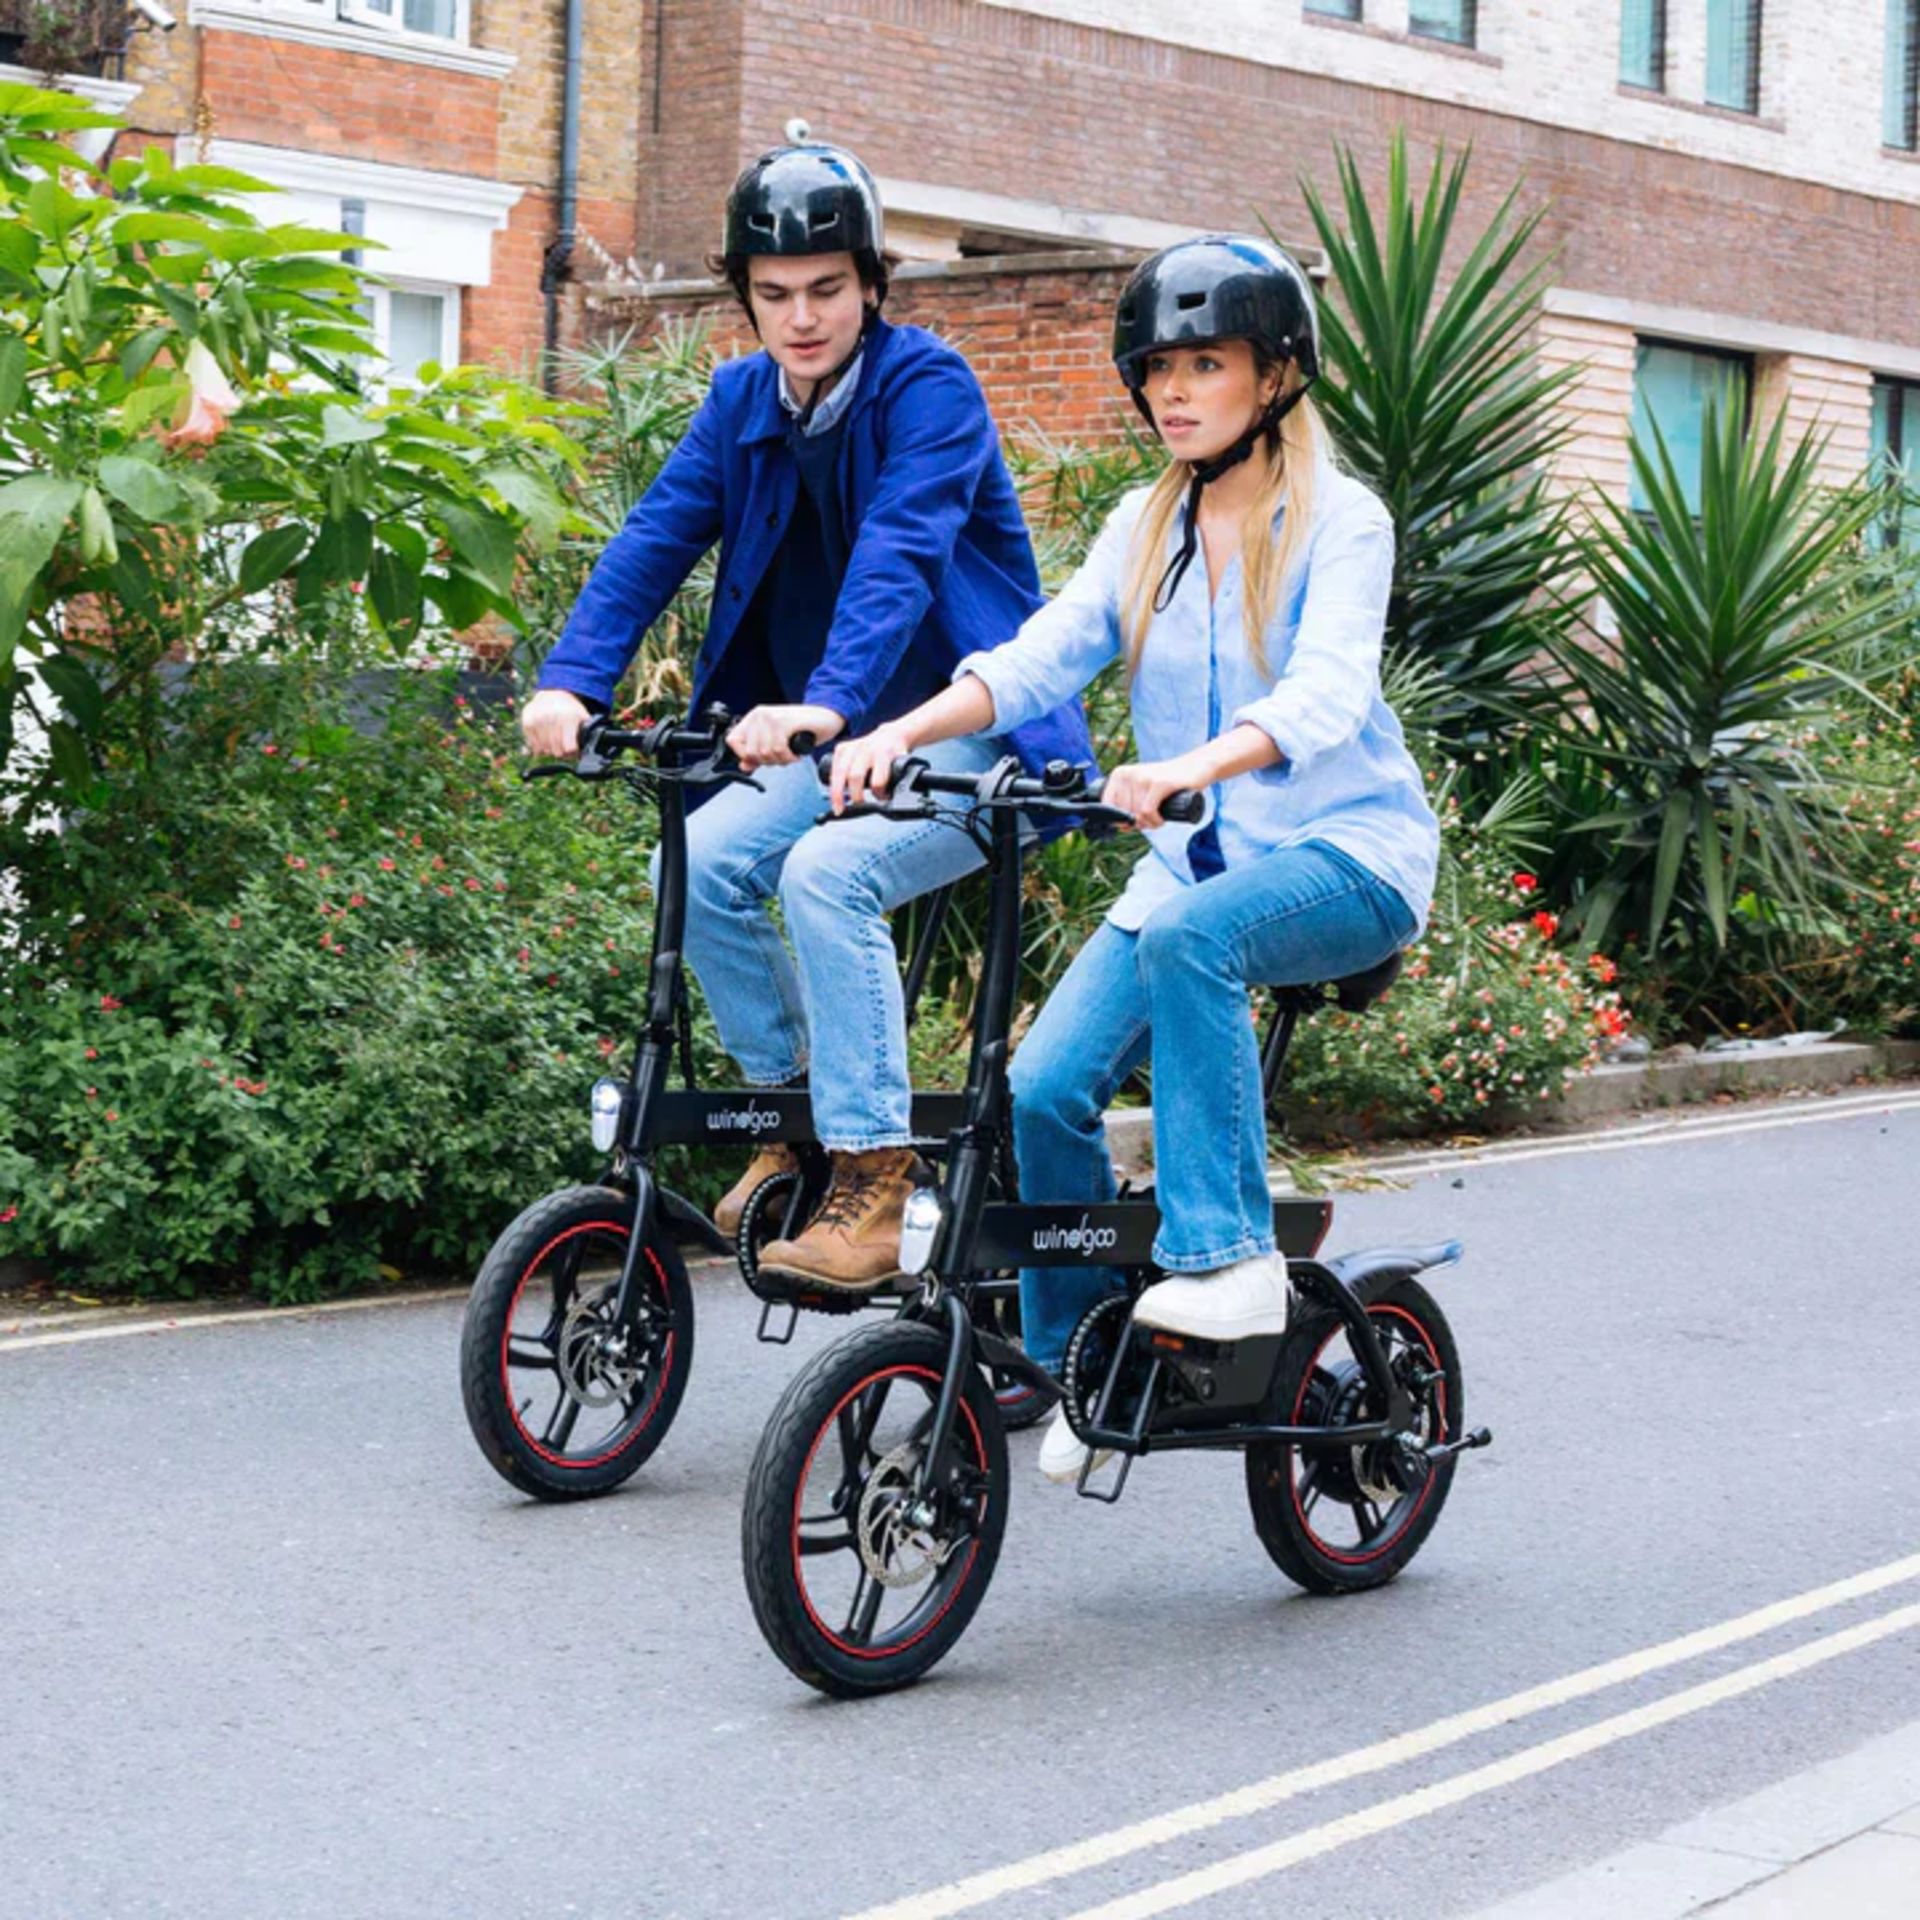 Windgoo B20 Pro Electric Bike. RRP £1,100.99. With 16-inch-wide tires and a frame of upgraded - Image 4 of 7